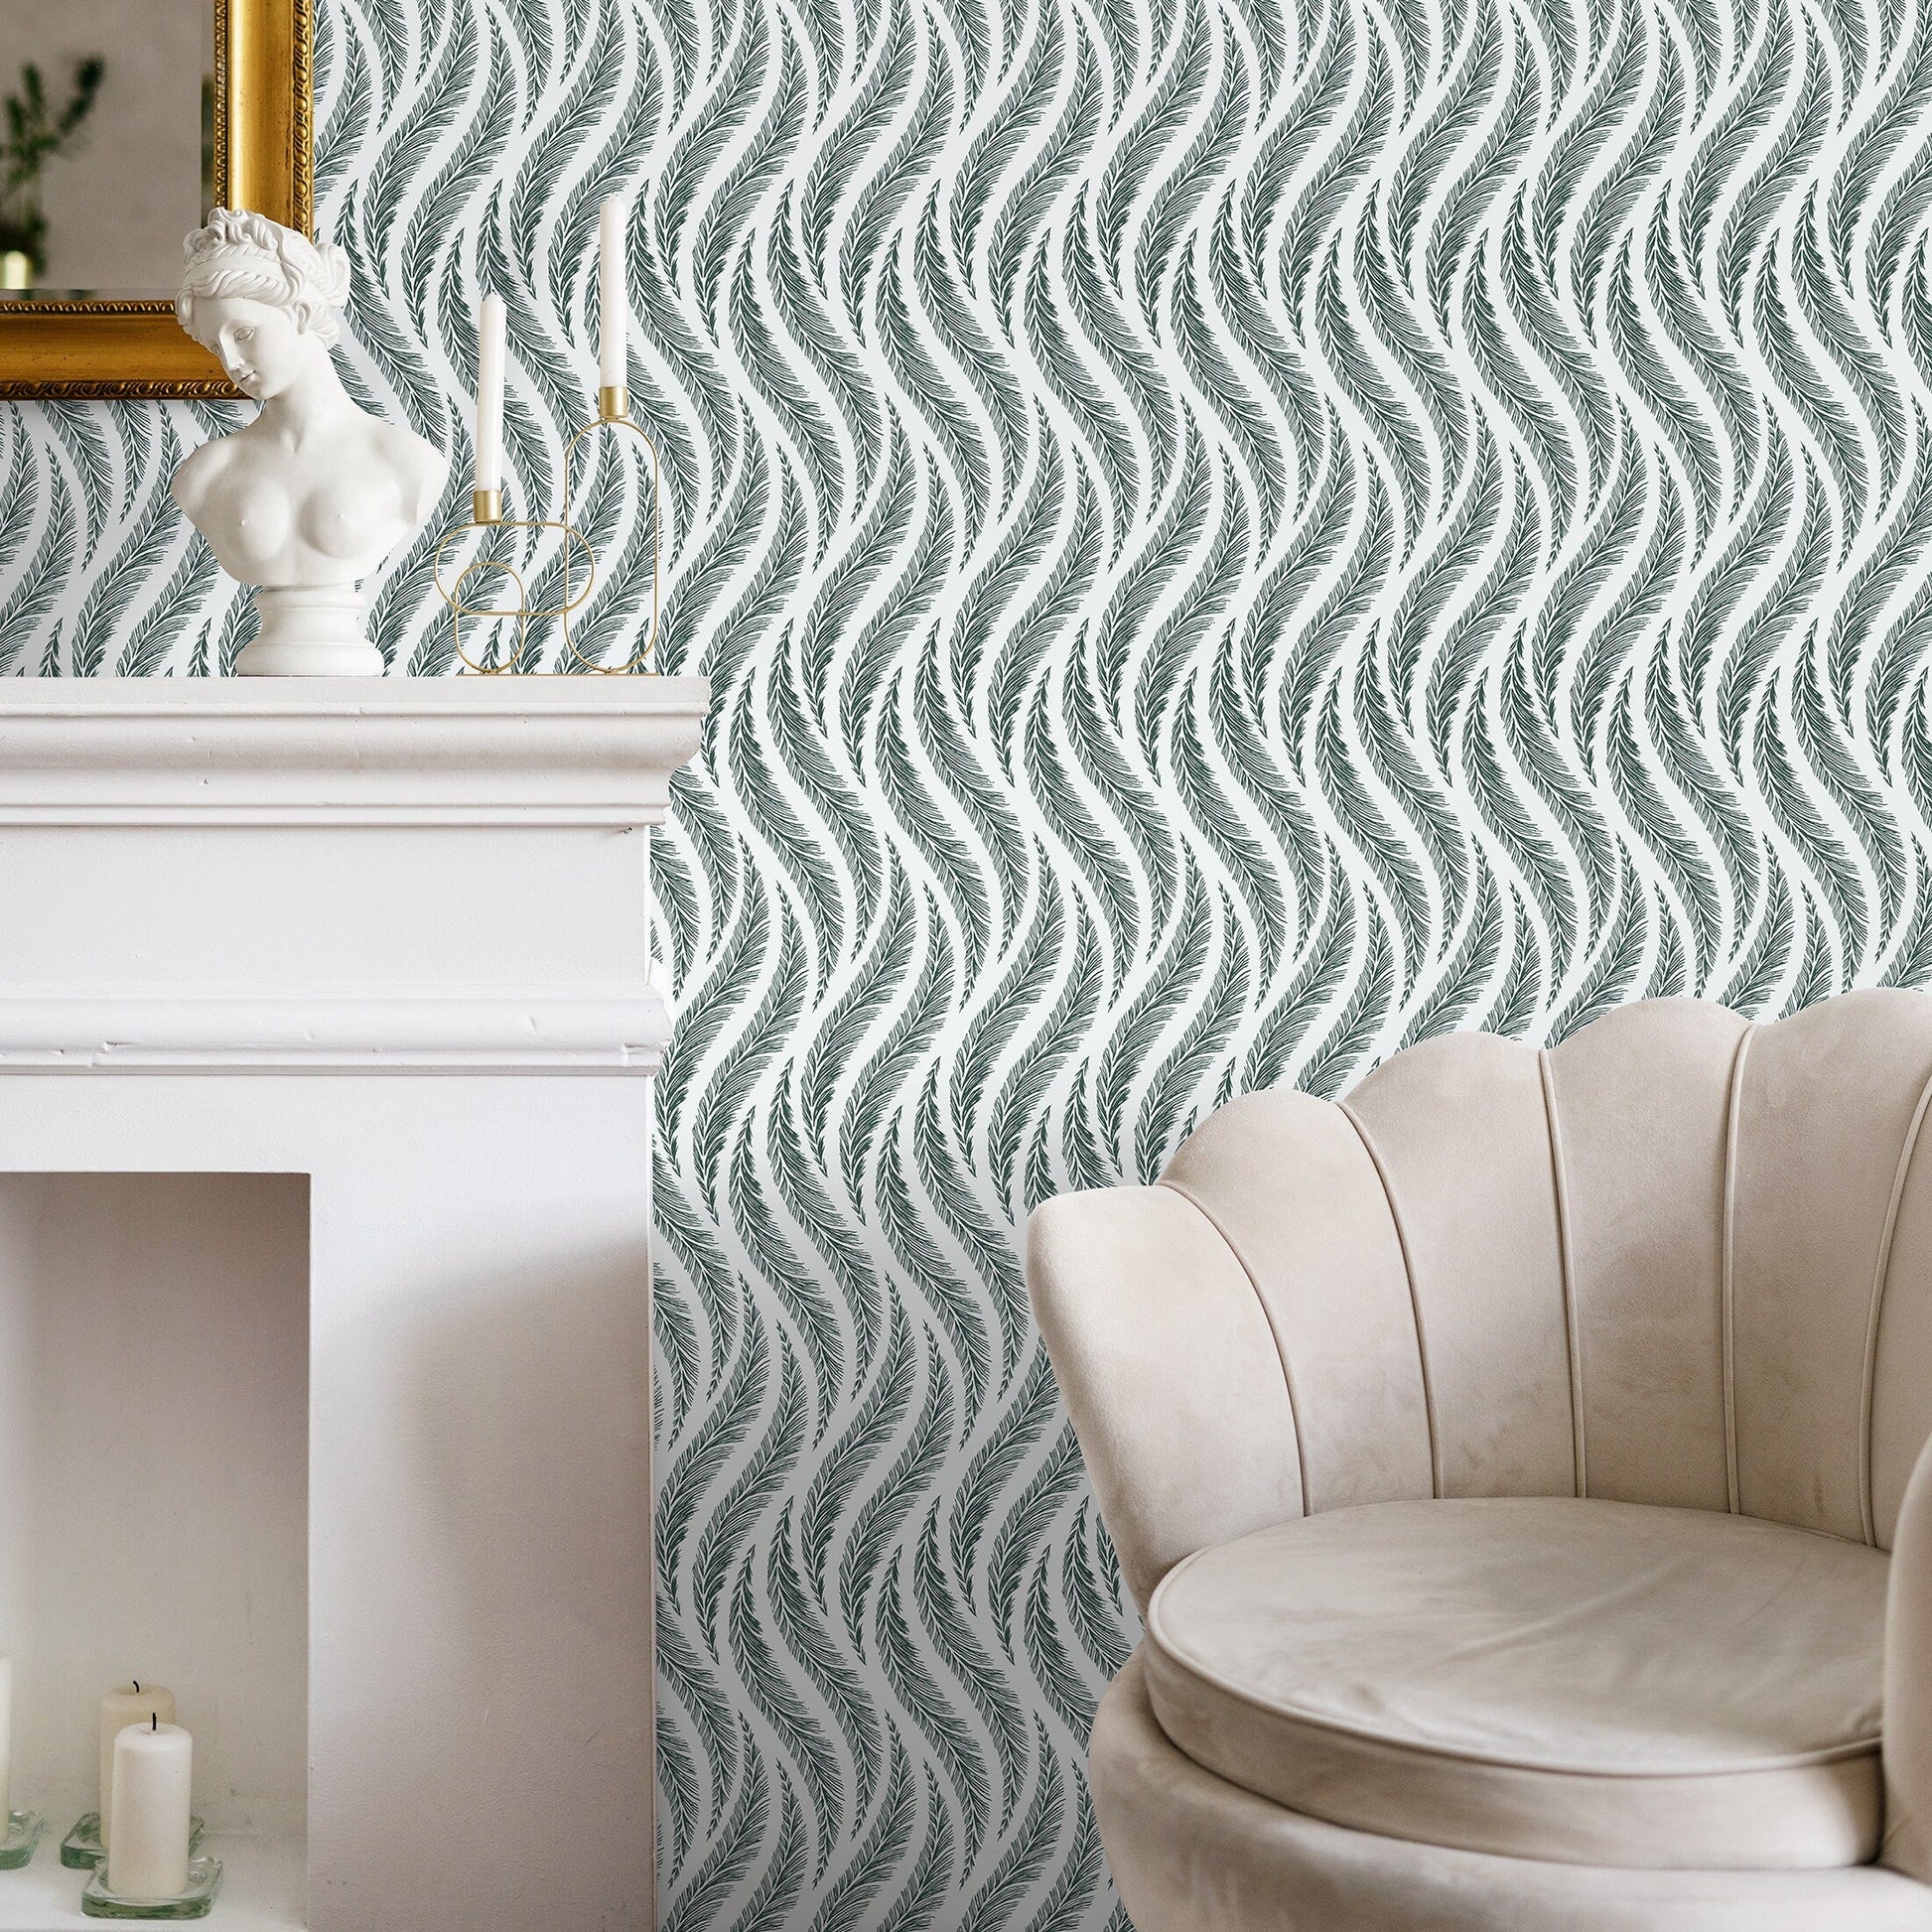 Wallpaper Peel and Stick Wallpaper Removable Wallpaper Home Decor Wall Art Wall Decor Room Decor / Green and Gray Feathers Wallpaper - C526